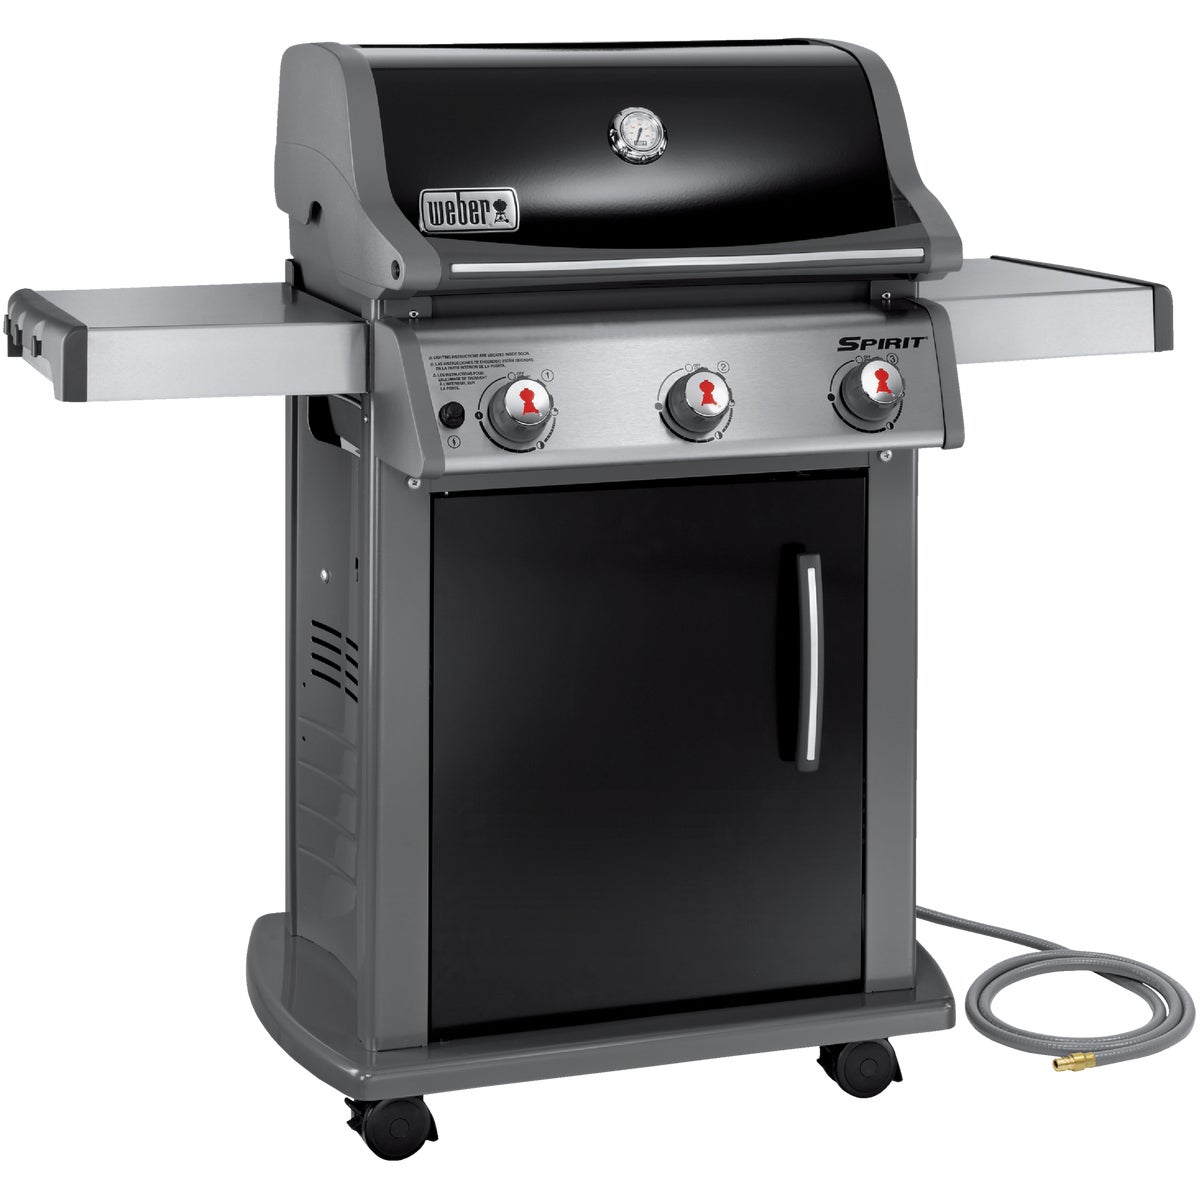 Item 817646, Durable natural gas grill. Features a primary cooking area is 424 Sq. In.